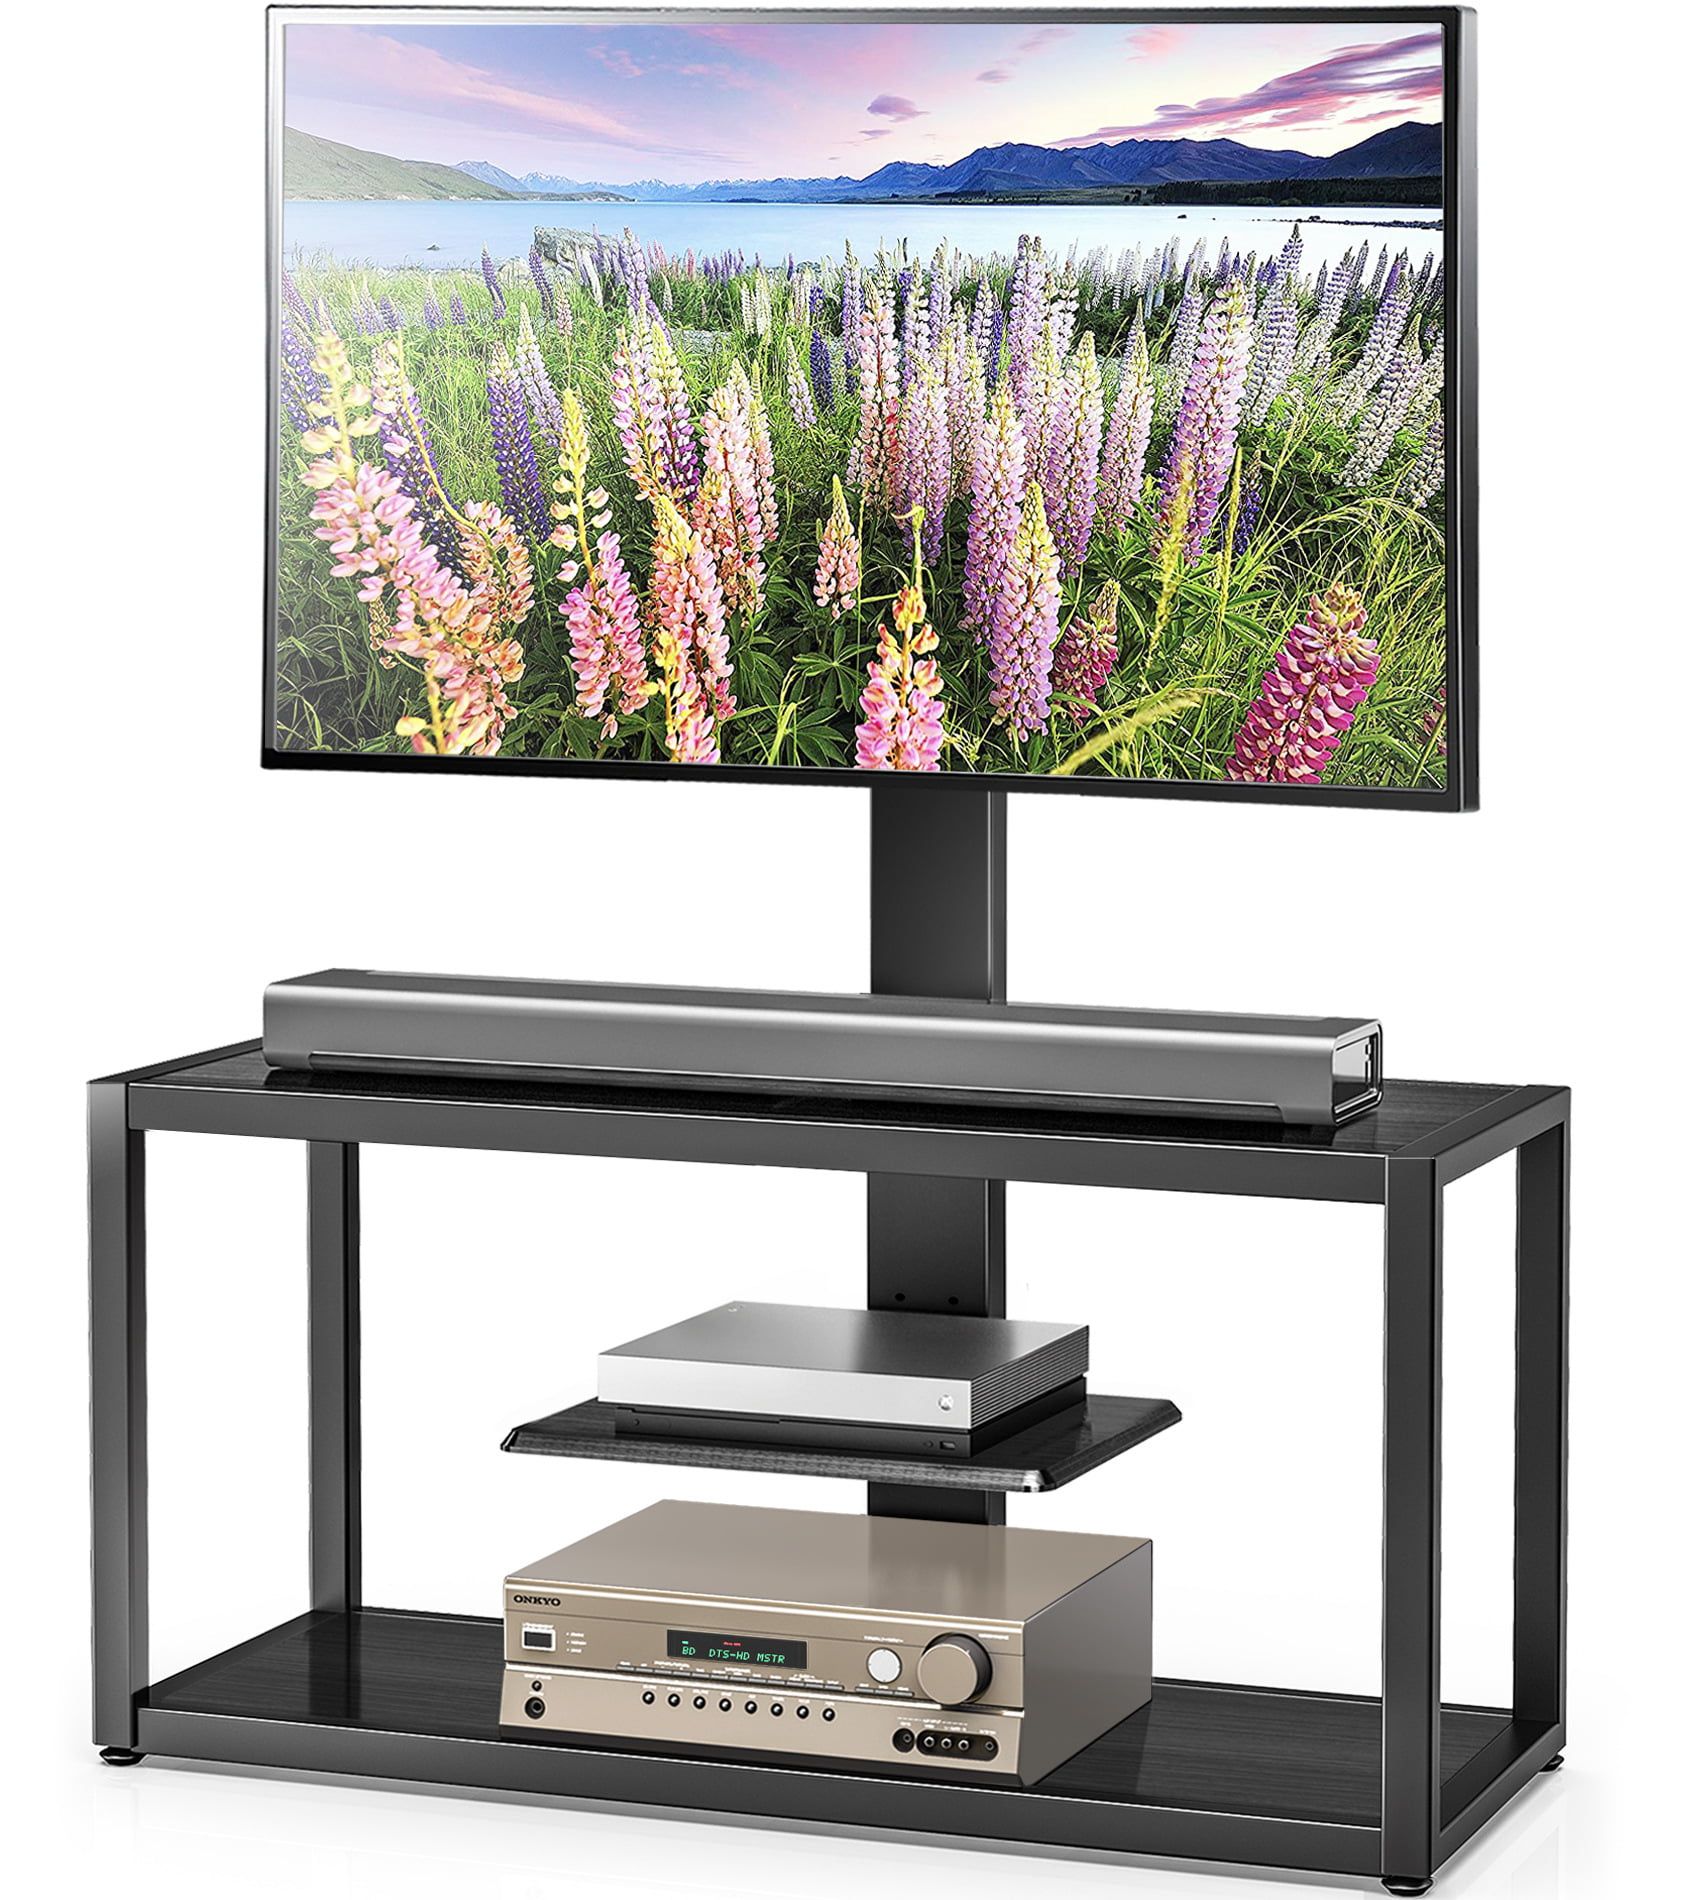 Fitueyes 3 Tiers Floor Tv Stand With Swivel & Tilt Mount – Suitable For With Stand For Flat Screen (Gallery 8 of 20)